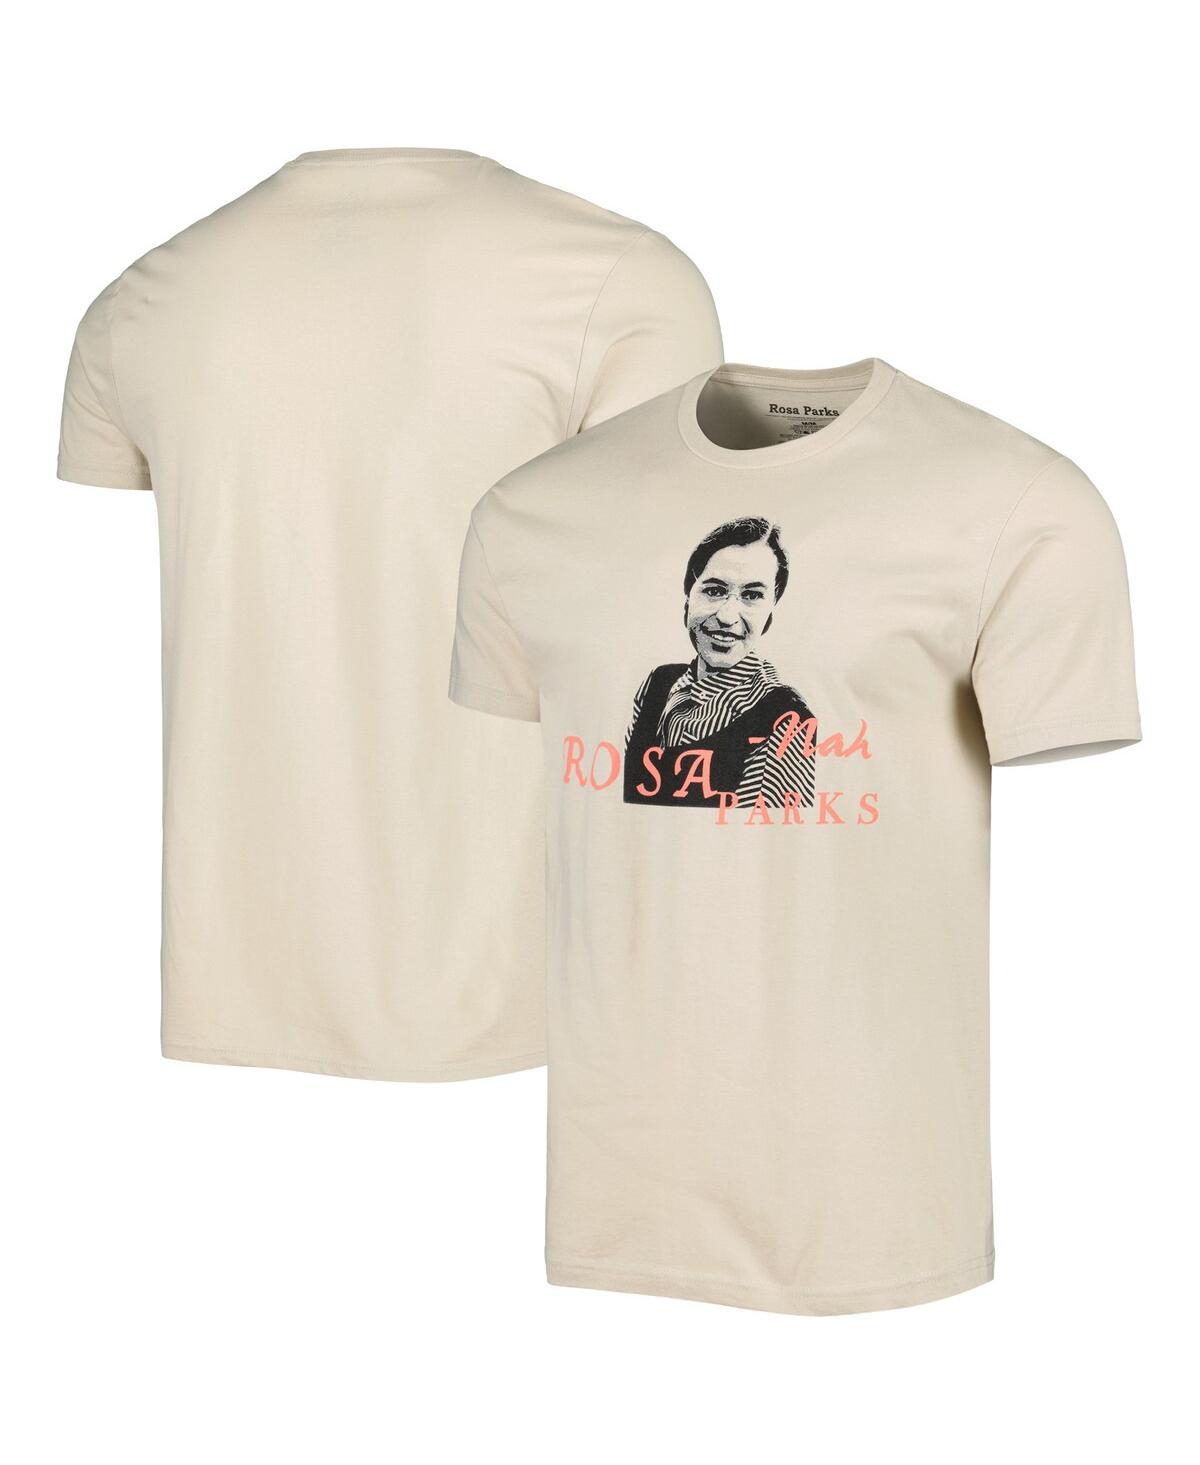 Men's and Women's Natural Rosa Parks Graphic T-shirt - Natural